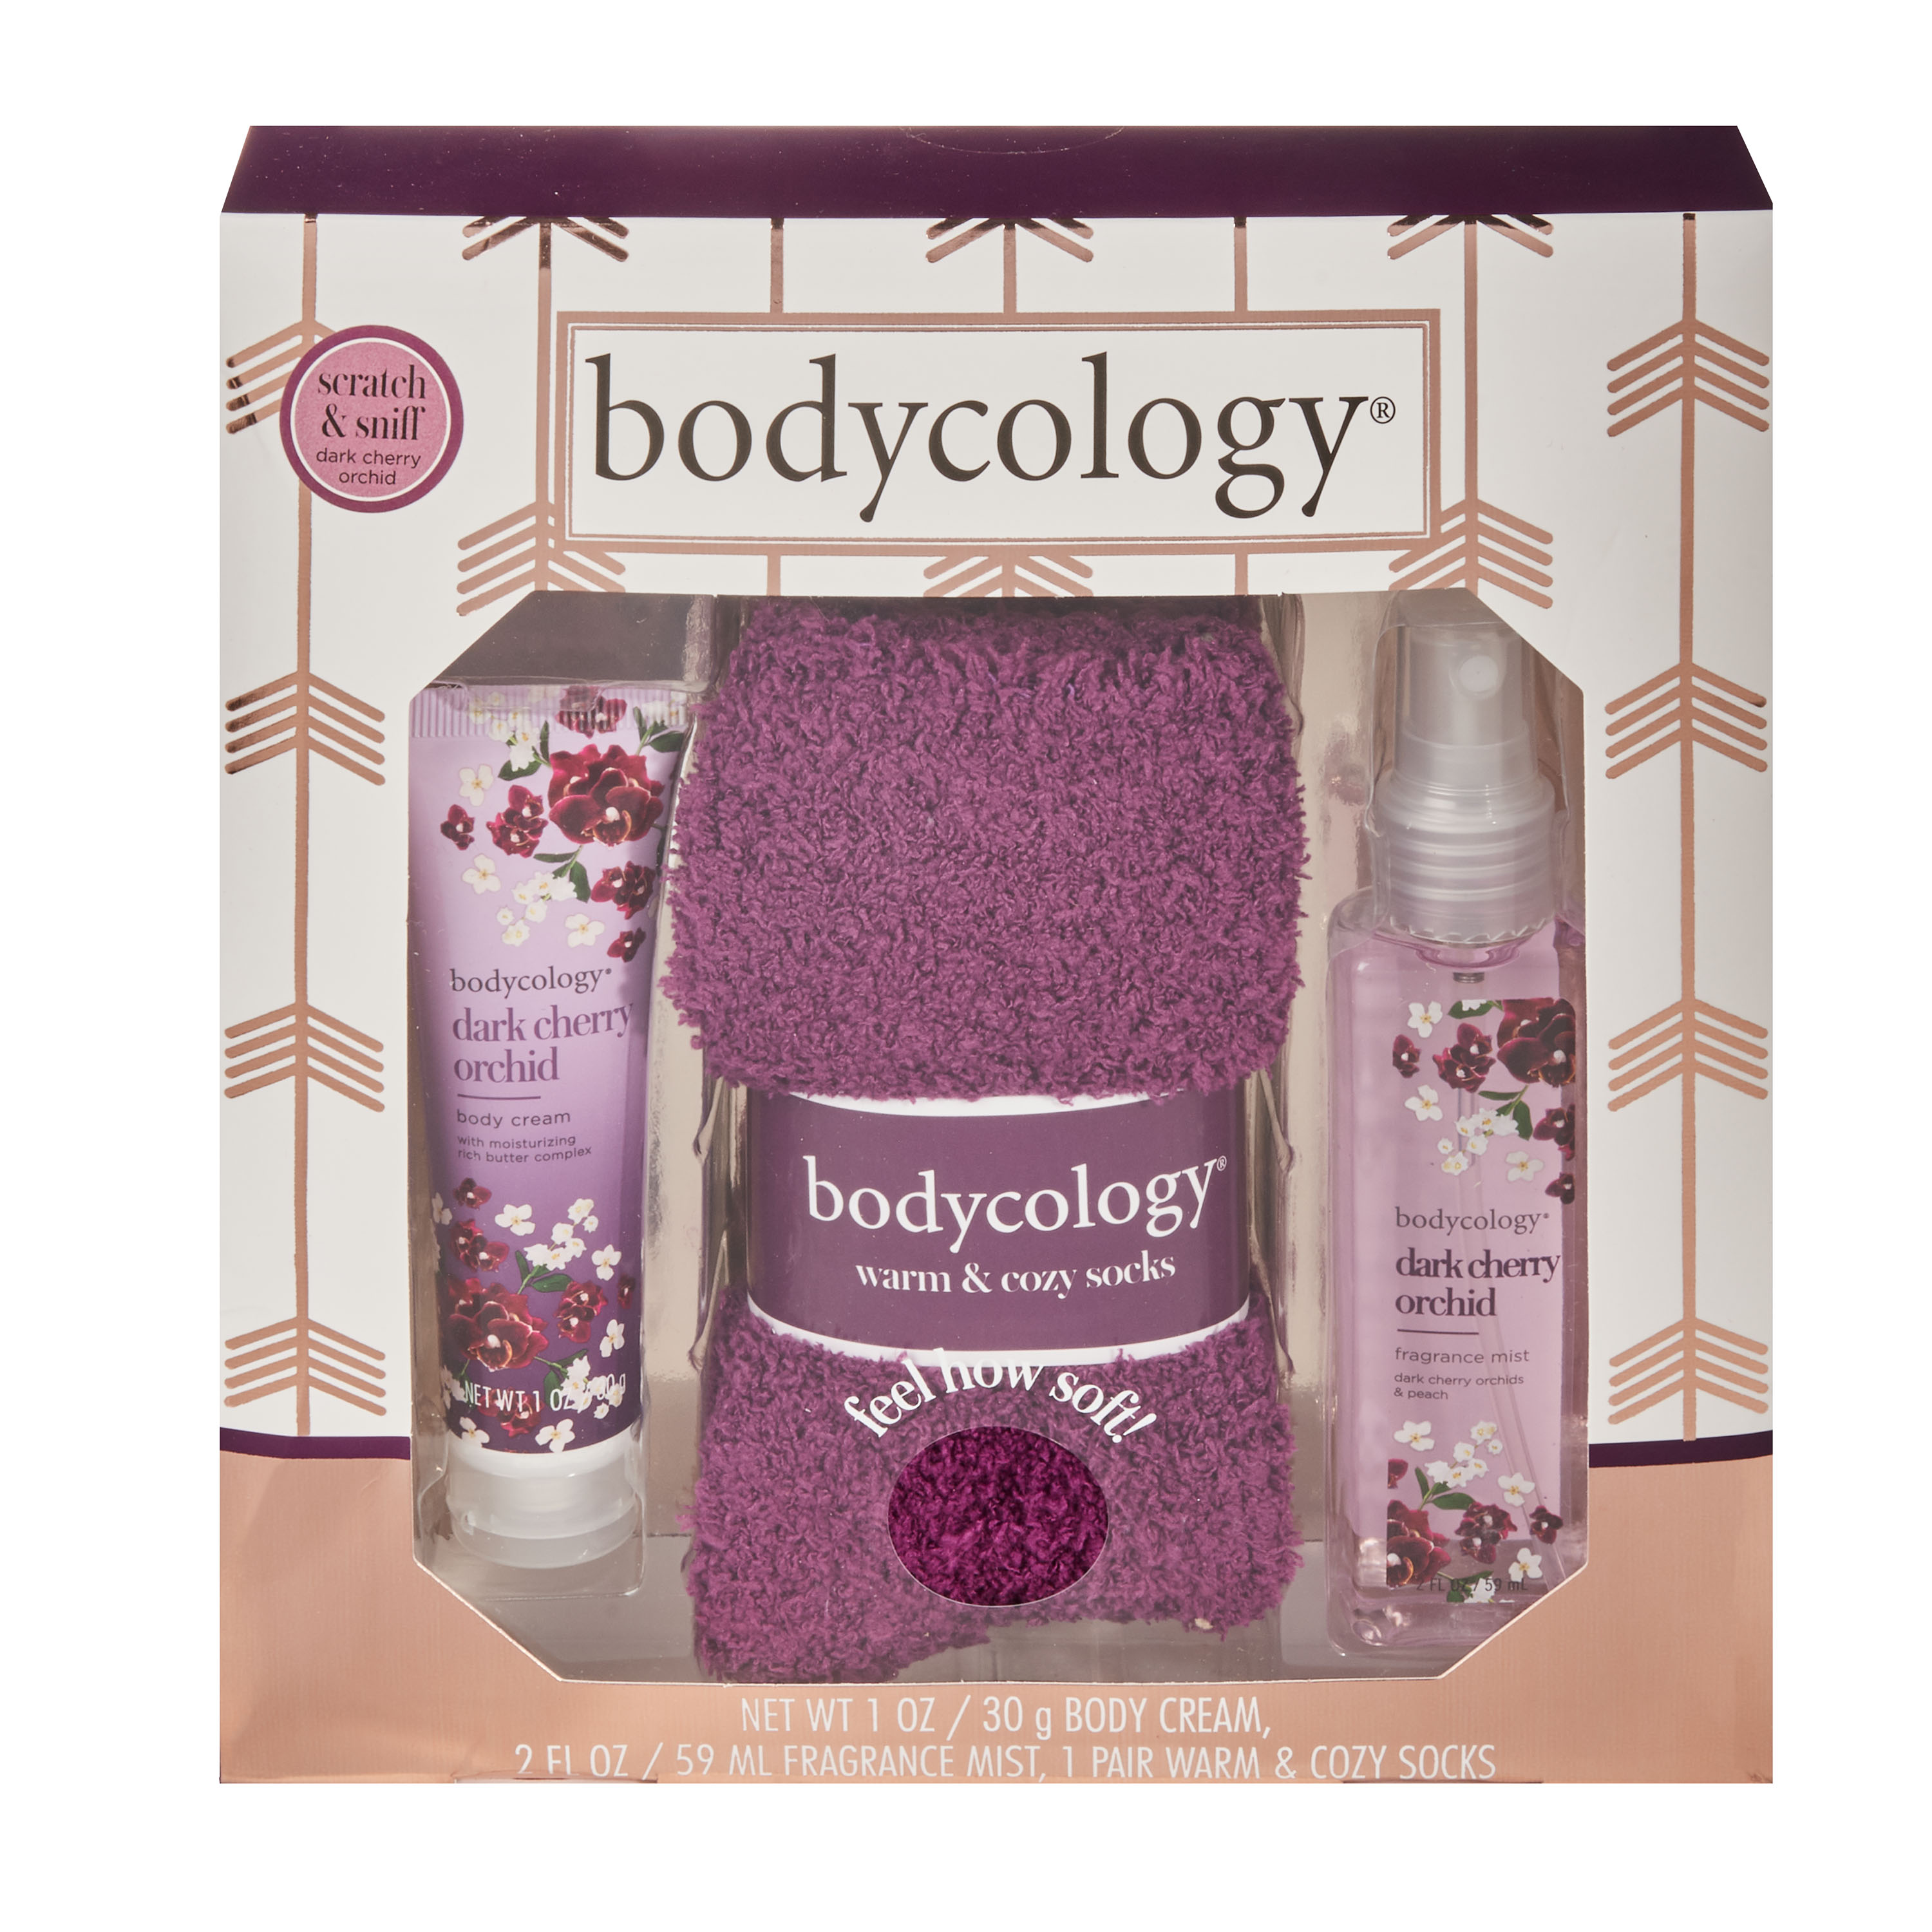 Bodycology 3-Piece Dark Cherry Orchid Fragrance Gift Set with Warm Socks - image 1 of 4